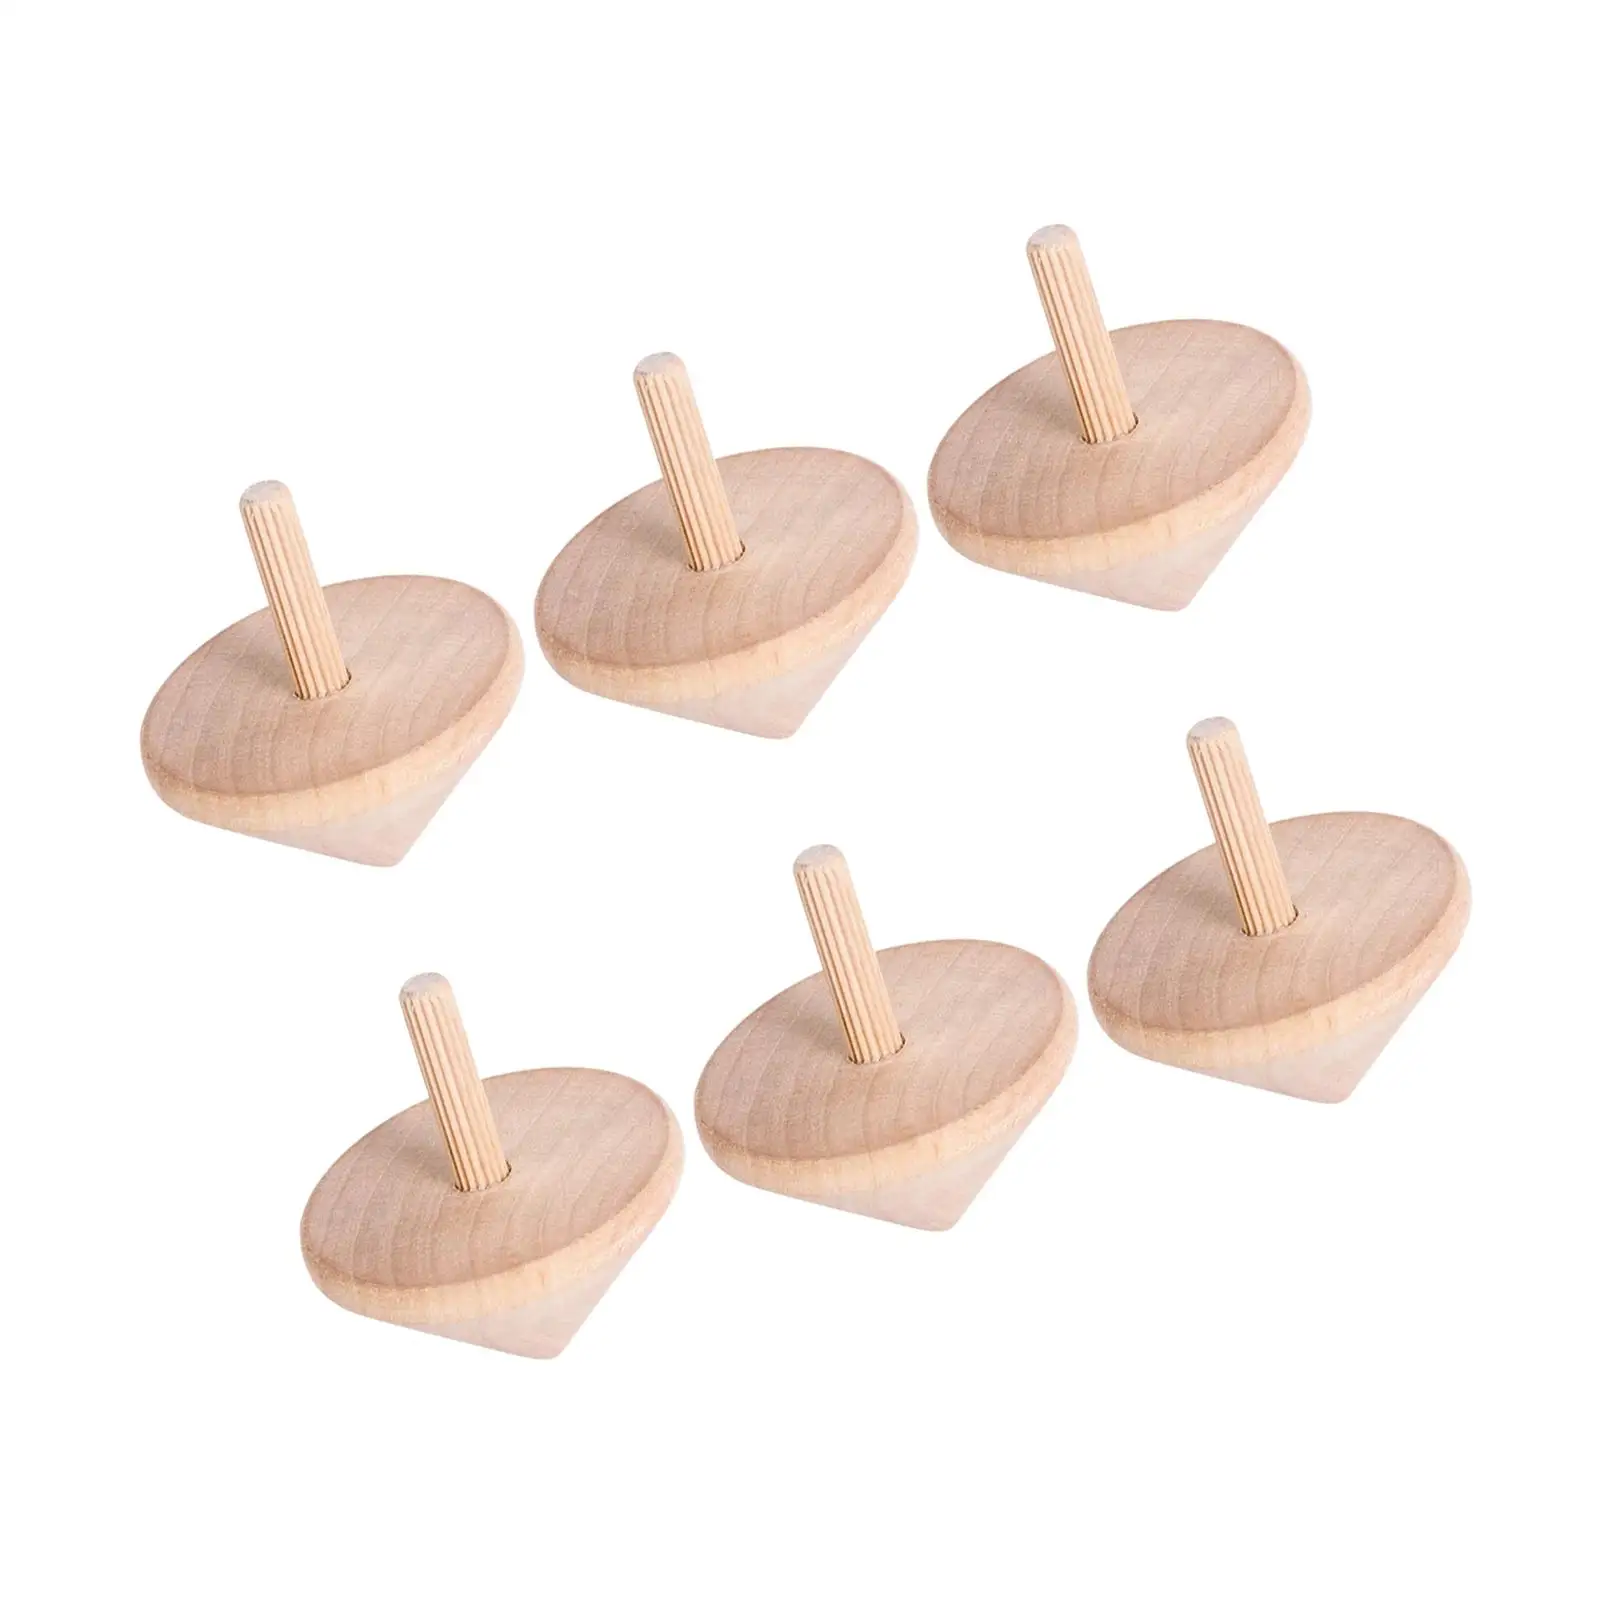 6 Pieces Unpainted Wood Blank Tops Kindergarten Education Toys for Toddlers Craft